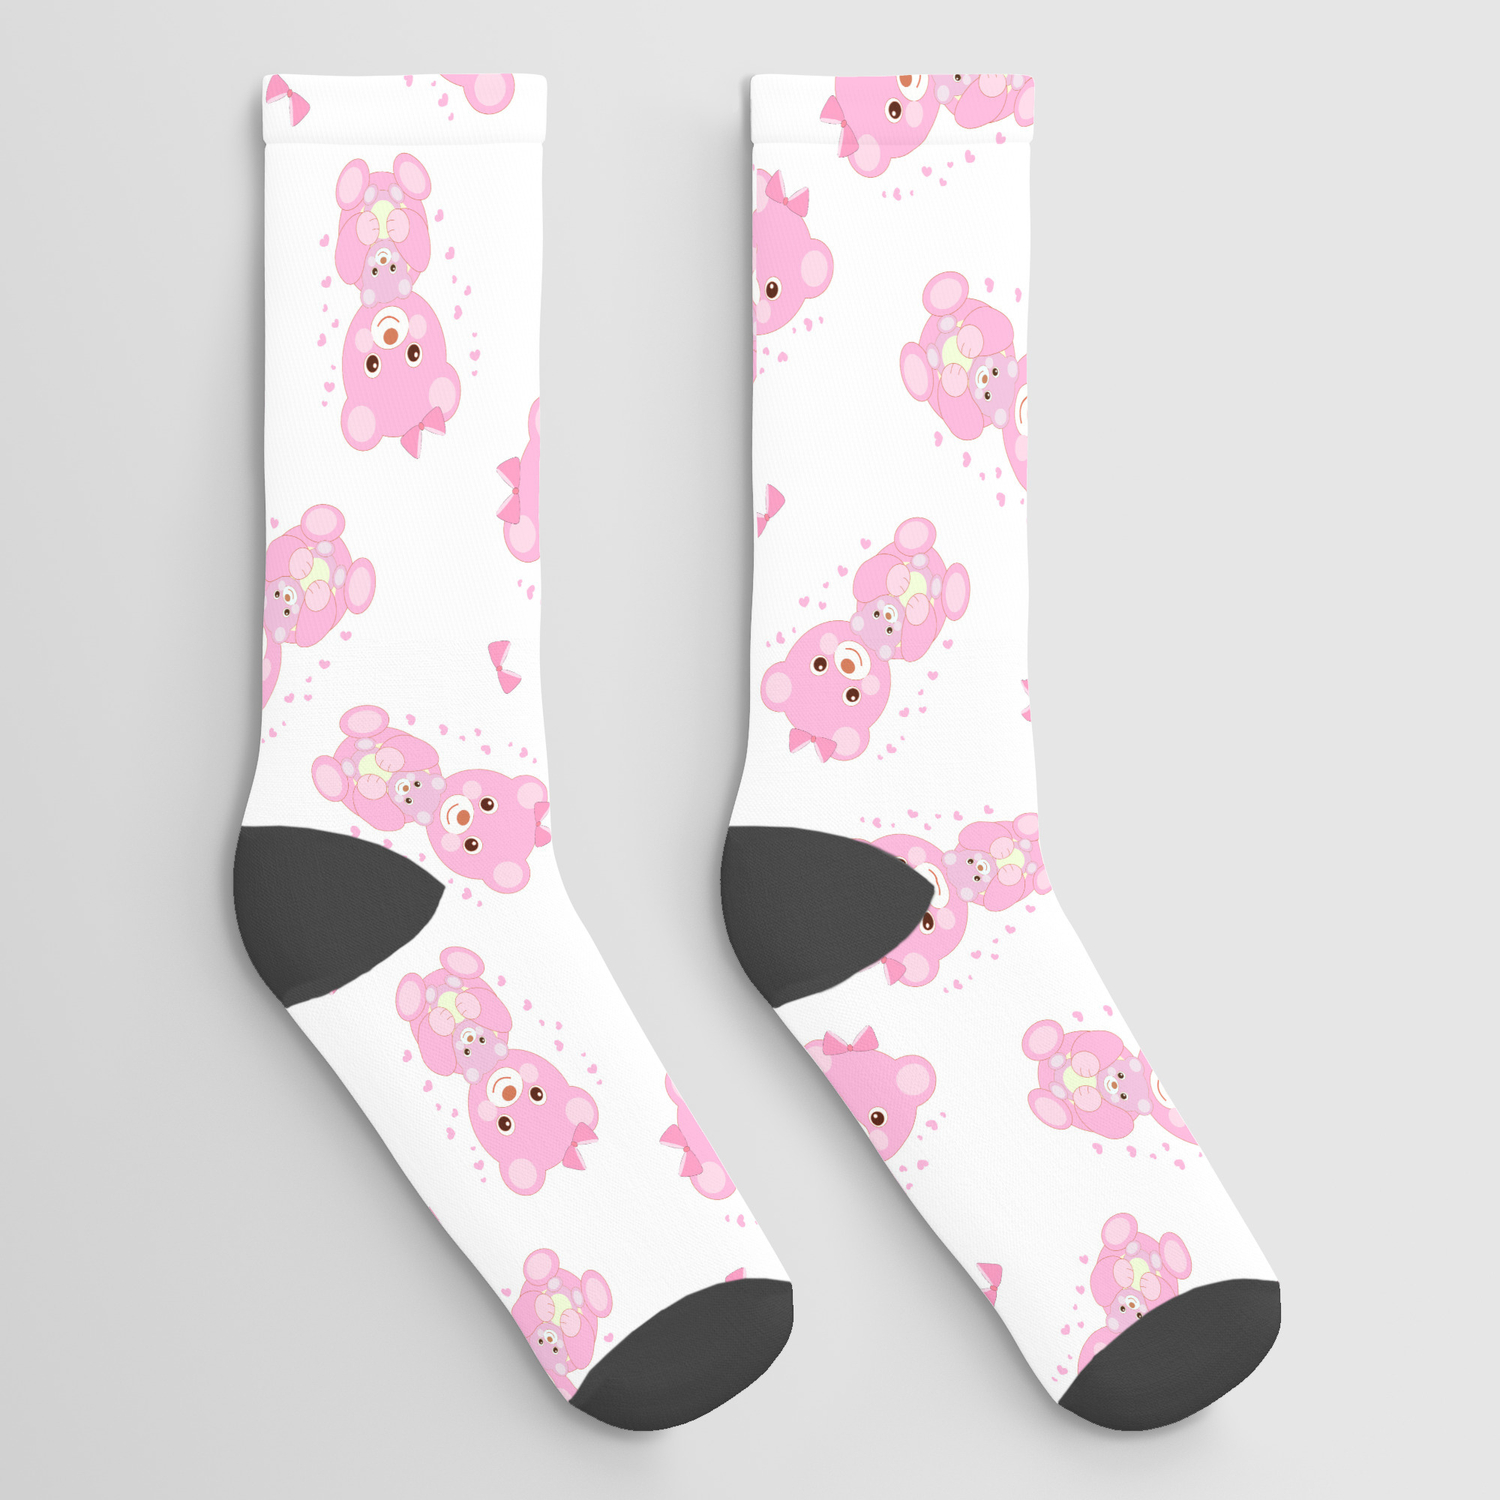 Cute Teddy Bear Crew Socks Soft Ankle Socks Available in 3 Colors  Fast Shipping in the US